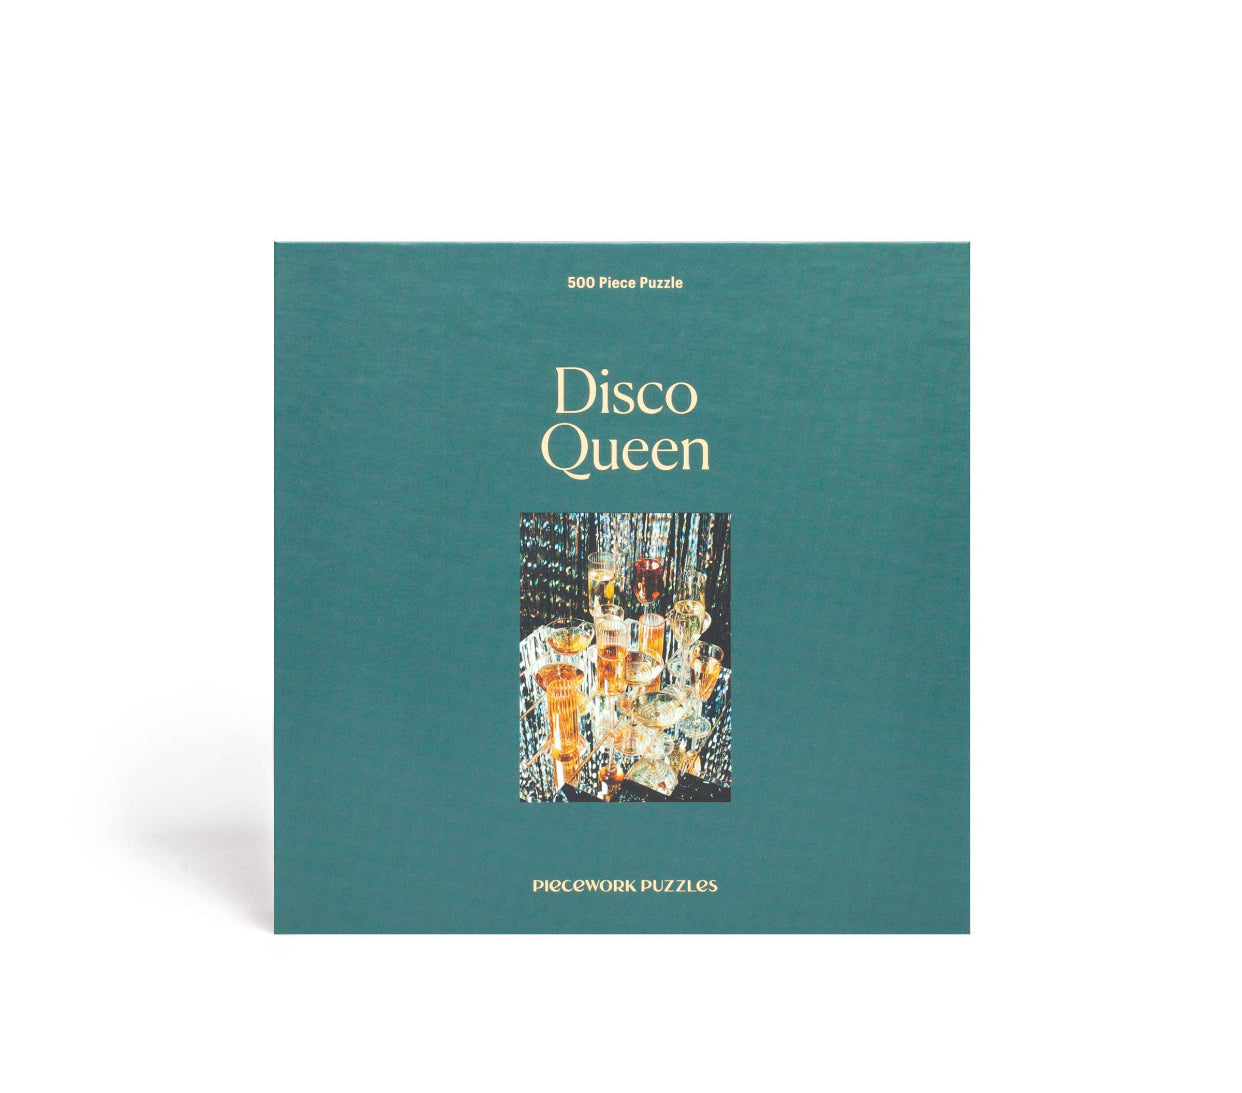 Disco Queen 500 piece puzzle by Pieceworks